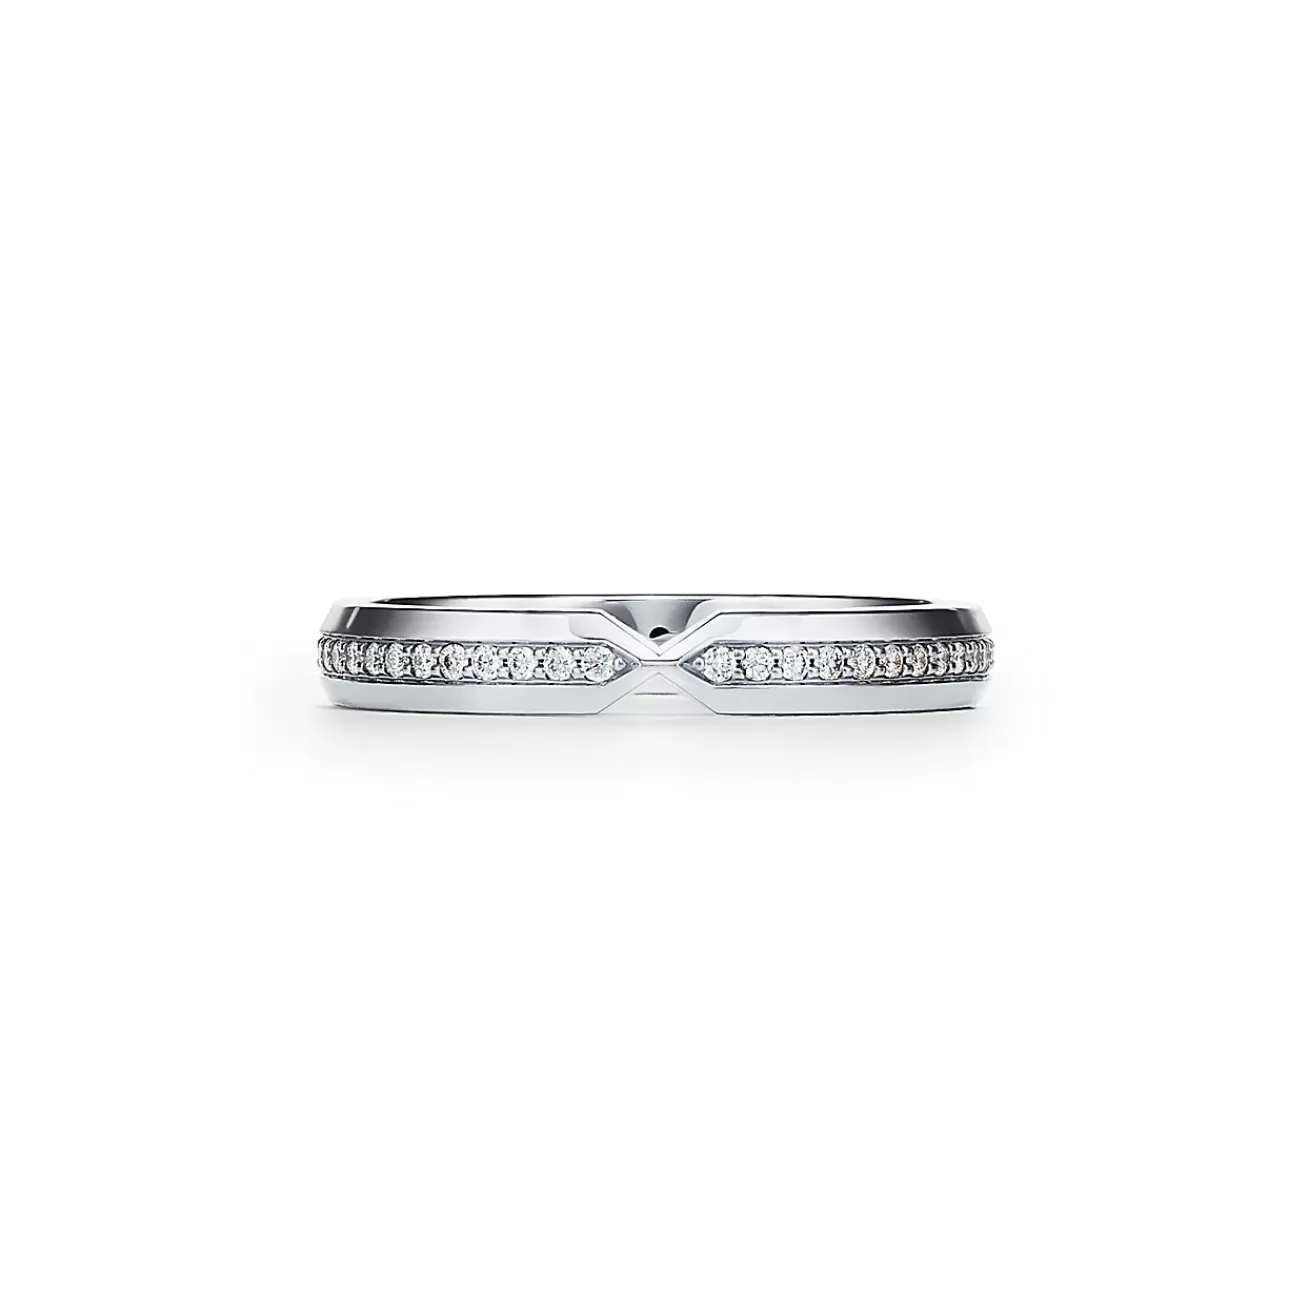 Tiffany & Co. The Tiffany® Setting nesting narrow band ring in platinum with diamonds. | ^Women Rings | Stacking Rings